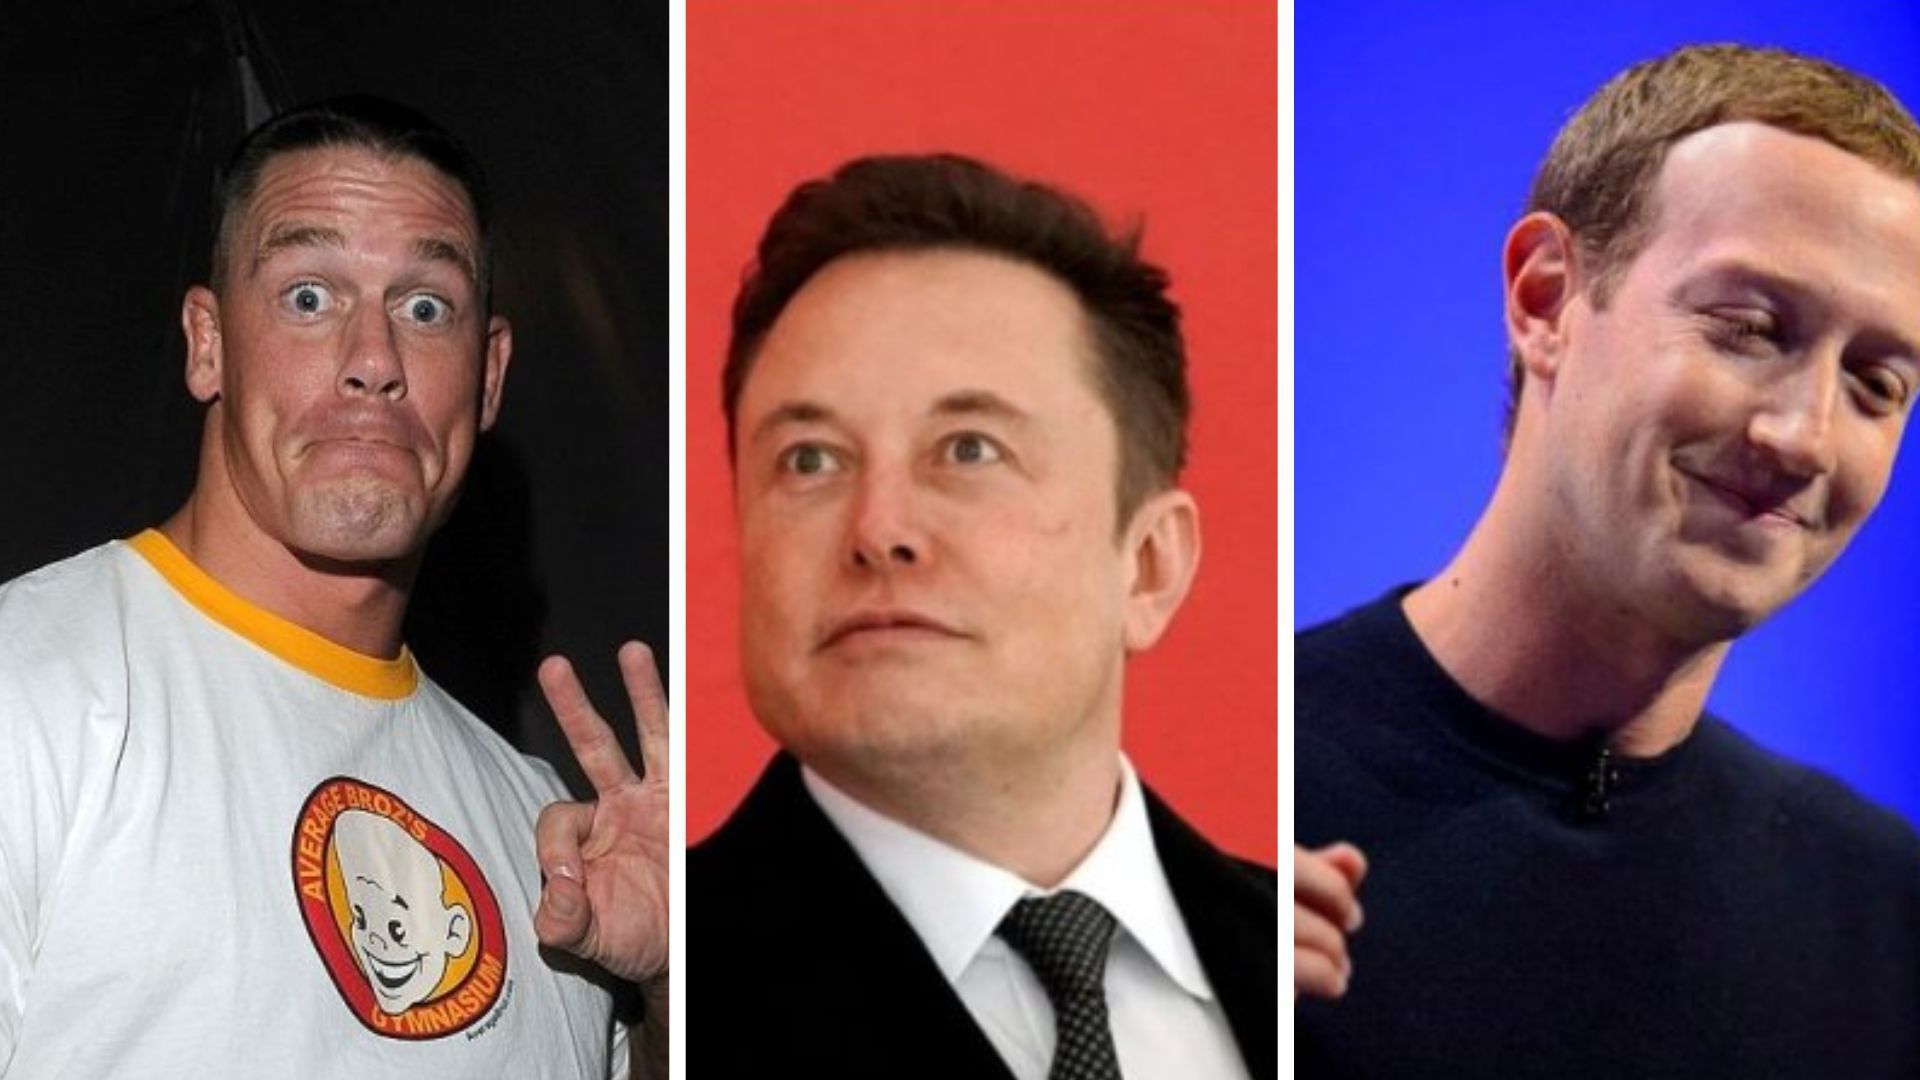 Elon Musk and Mark Zuckerberg are currently going head-to-head in social media rivalry